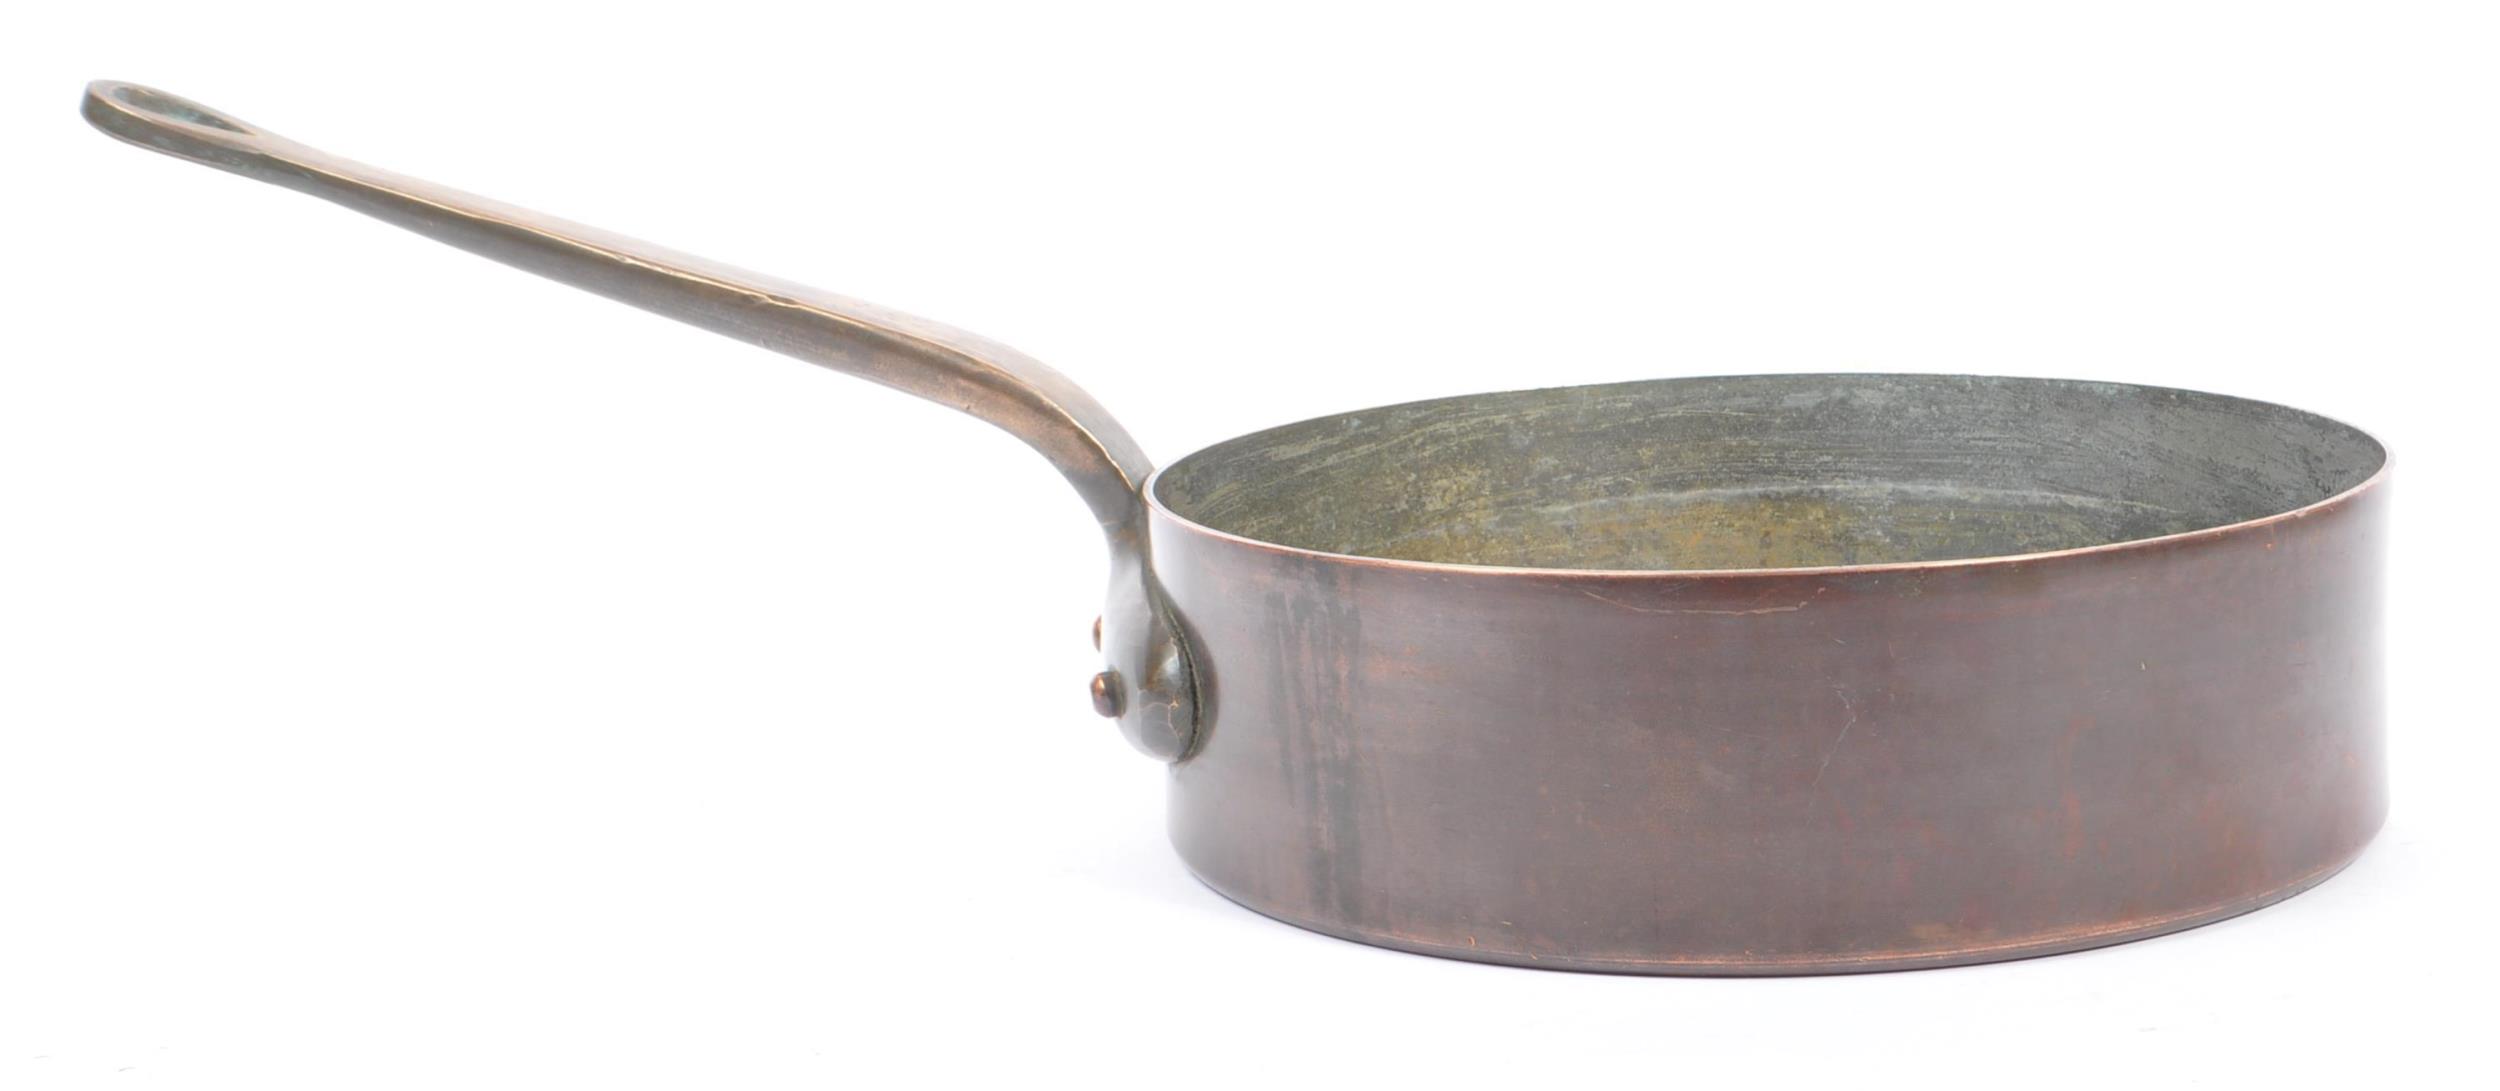 LARGE HEAVYWEIGHT MID 20TH CENTURY COPPER & BRONZE SKILLET PAN - Image 3 of 5